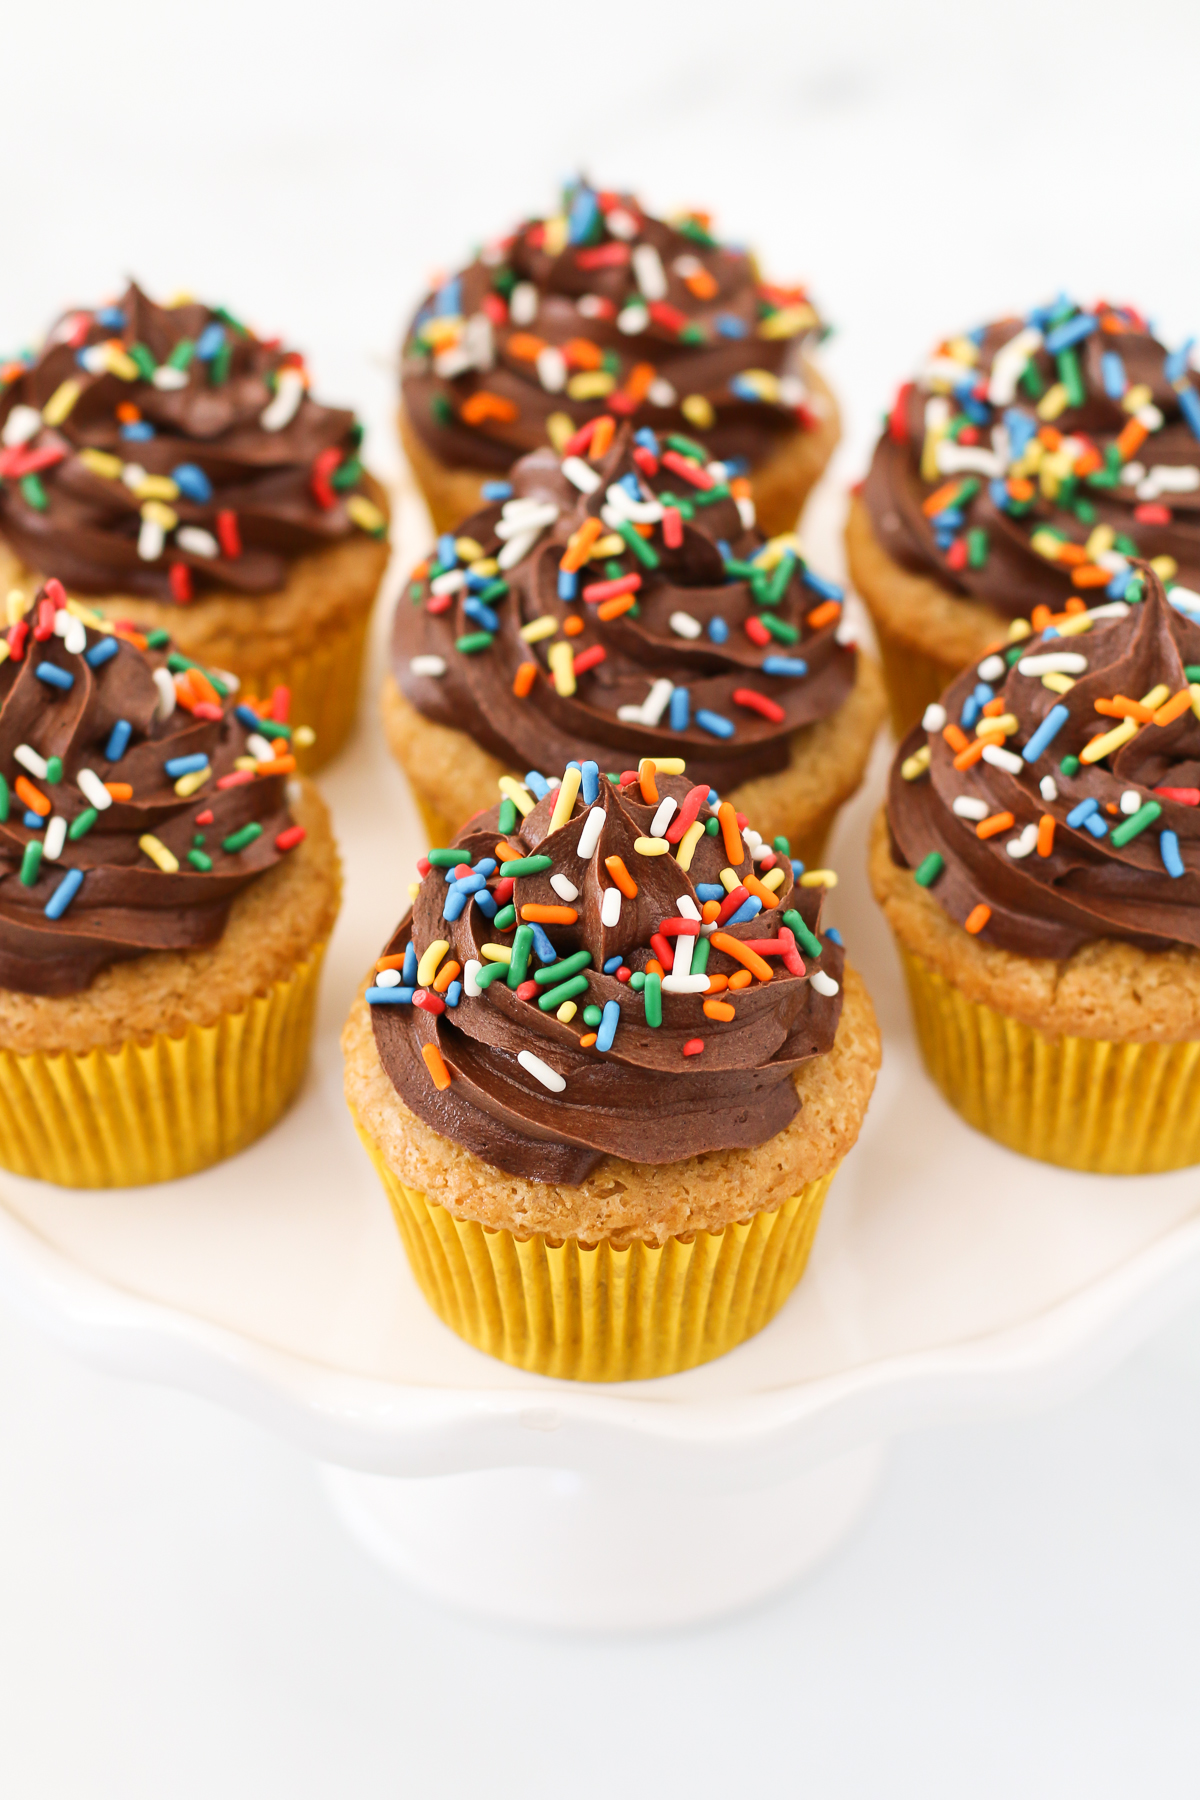 Gluten Free Vegan Vanilla Cupcakes With Chocolate Frosting,Best Mattress Toppers For Back Pain